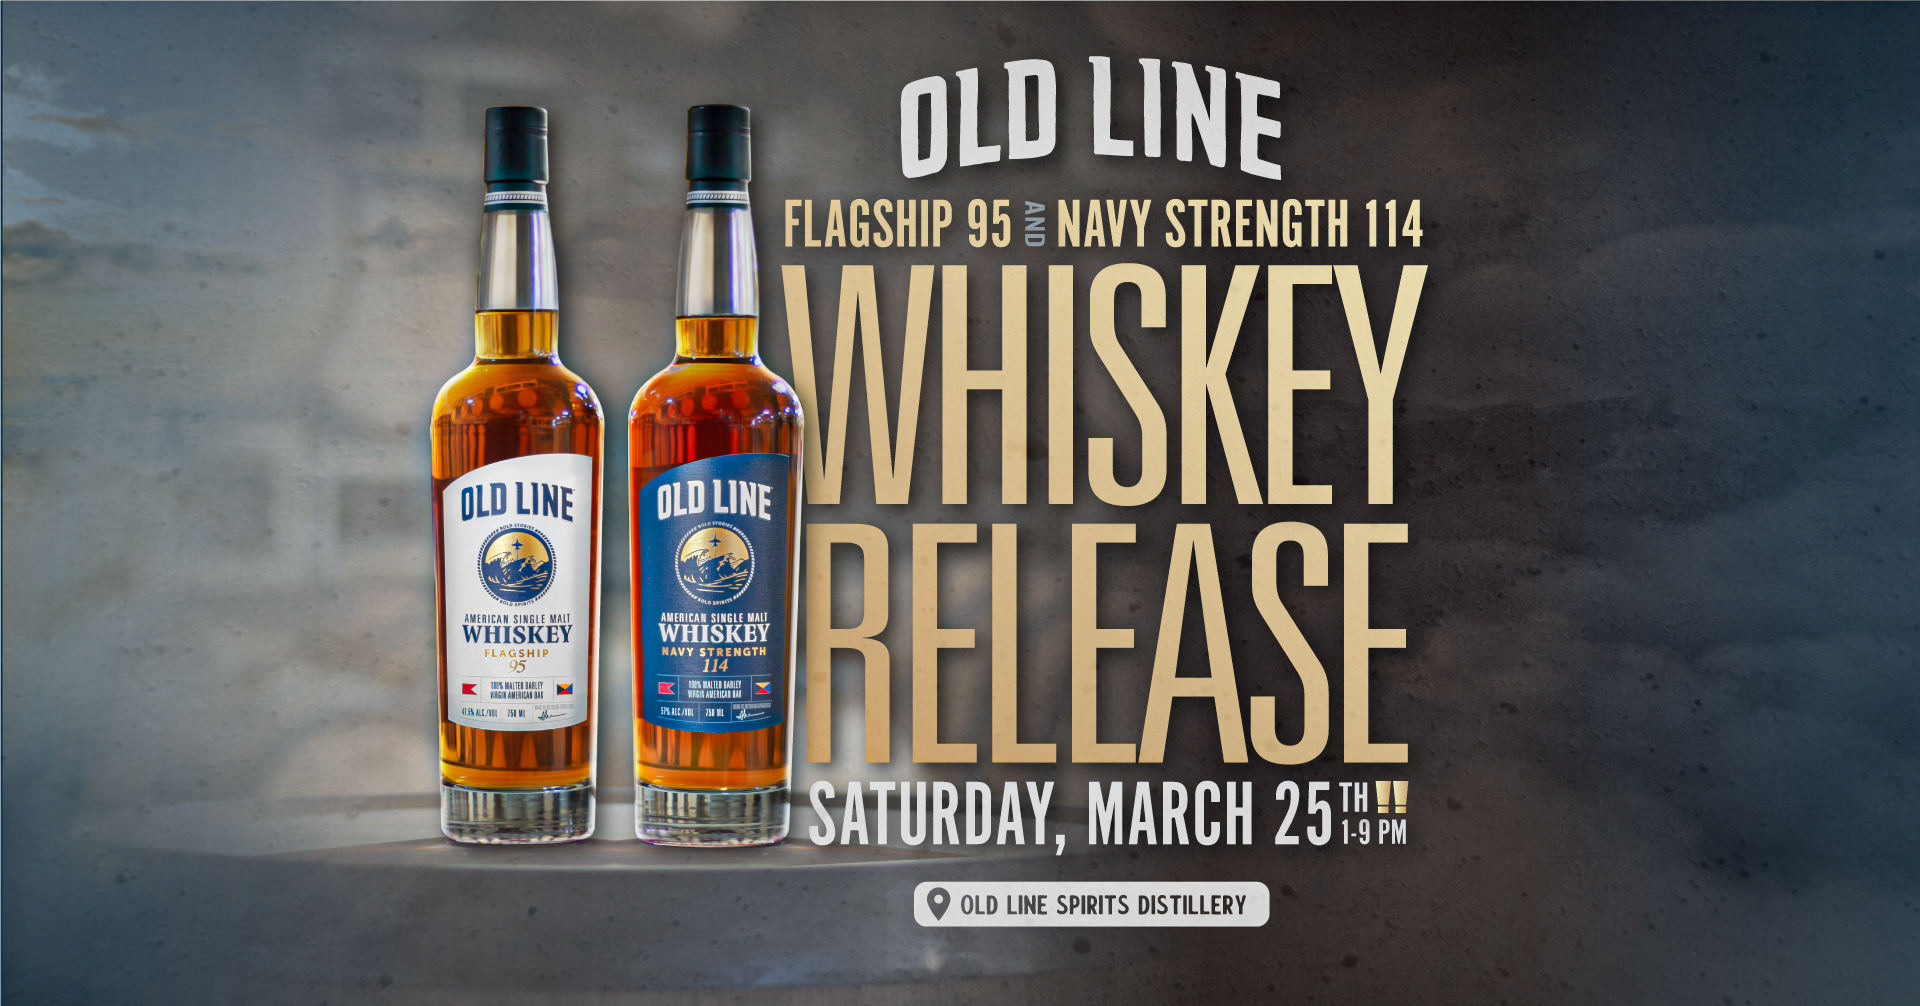 Old Line Whiskey Release Facebook Event